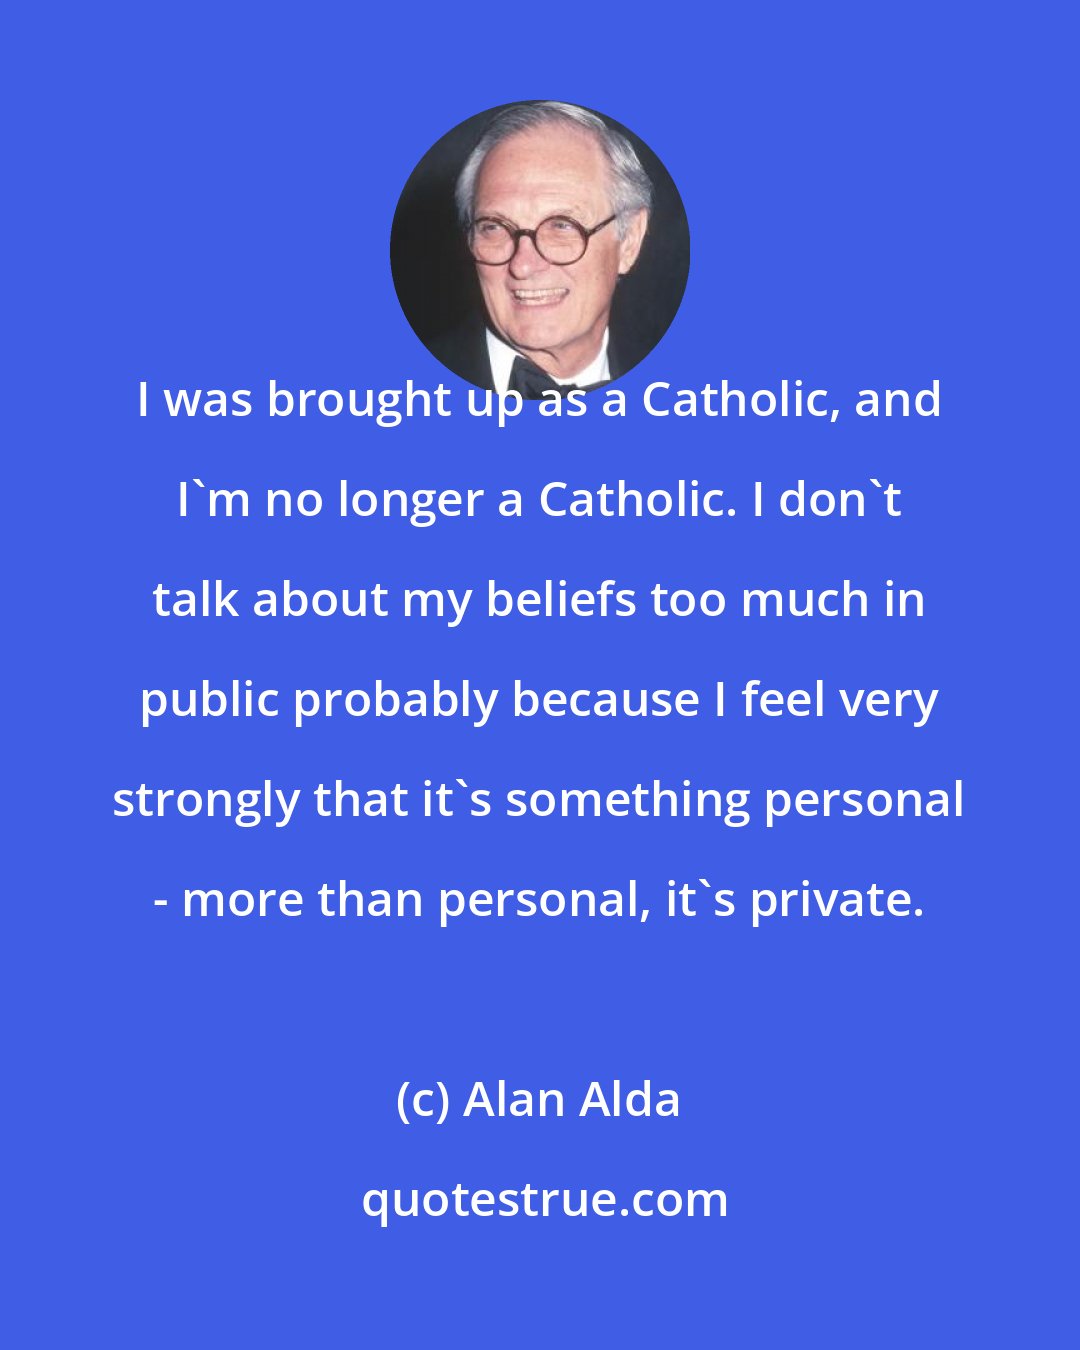 Alan Alda: I was brought up as a Catholic, and I'm no longer a Catholic. I don't talk about my beliefs too much in public probably because I feel very strongly that it's something personal - more than personal, it's private.